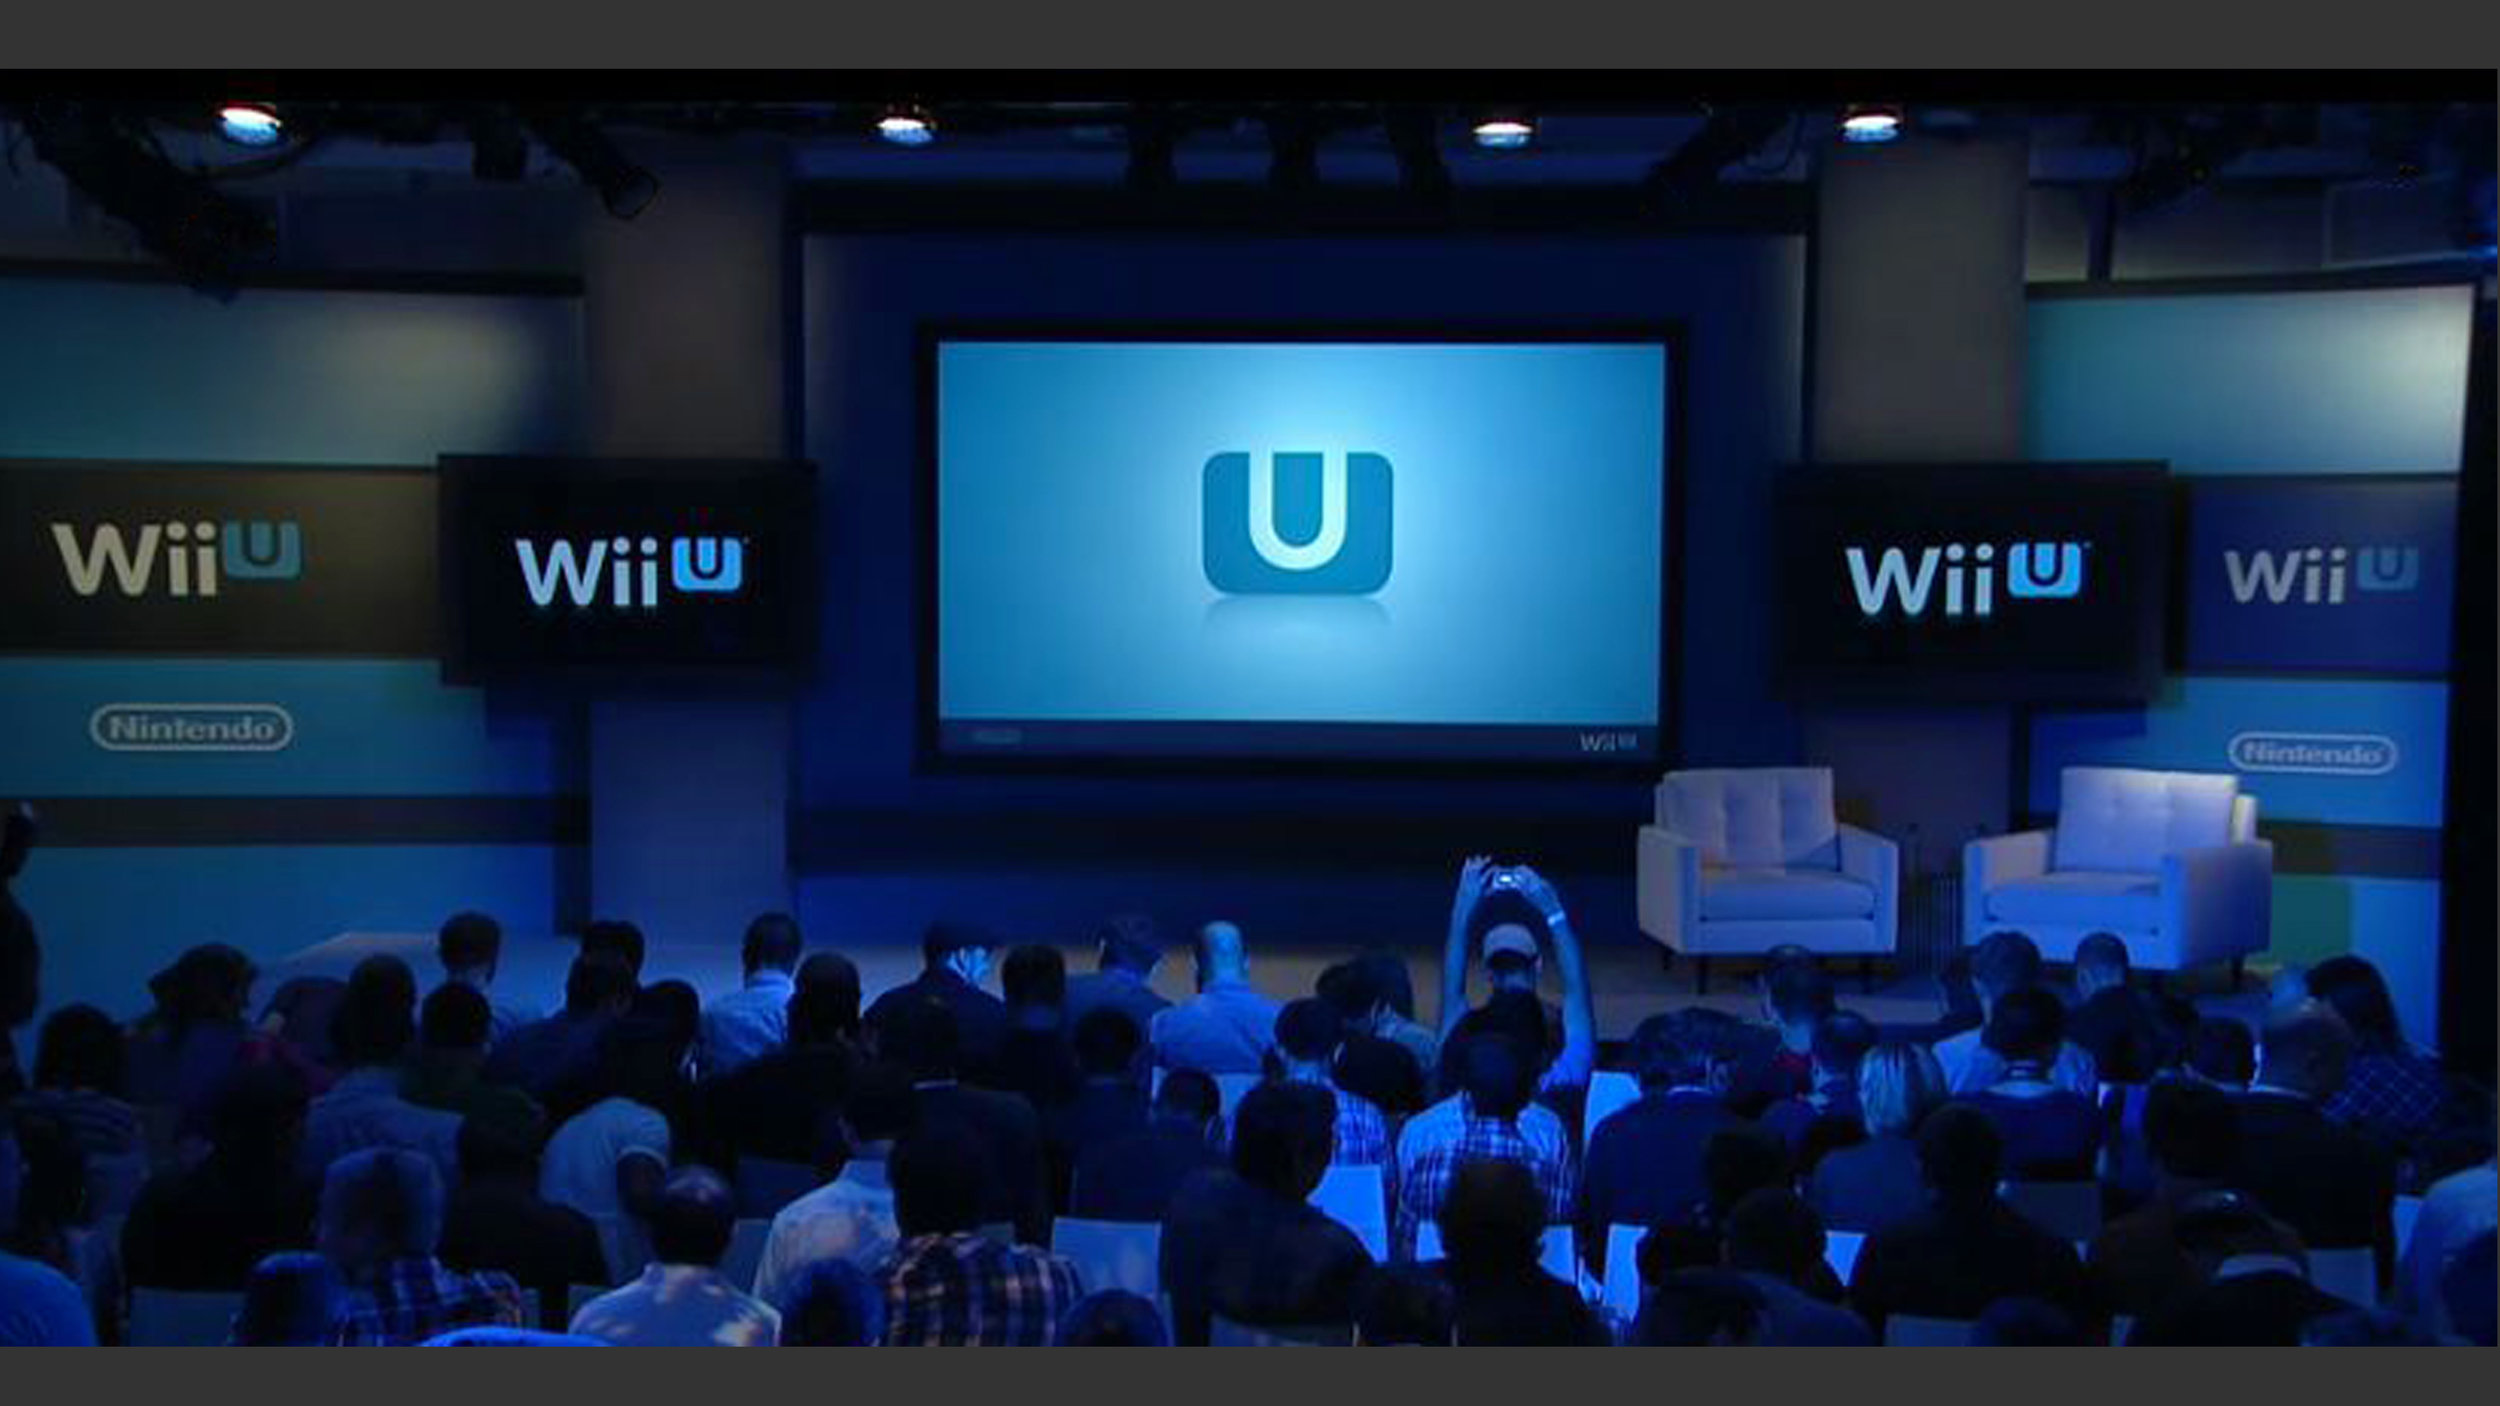 wii-u-preview-event-1 EDITED.jpg